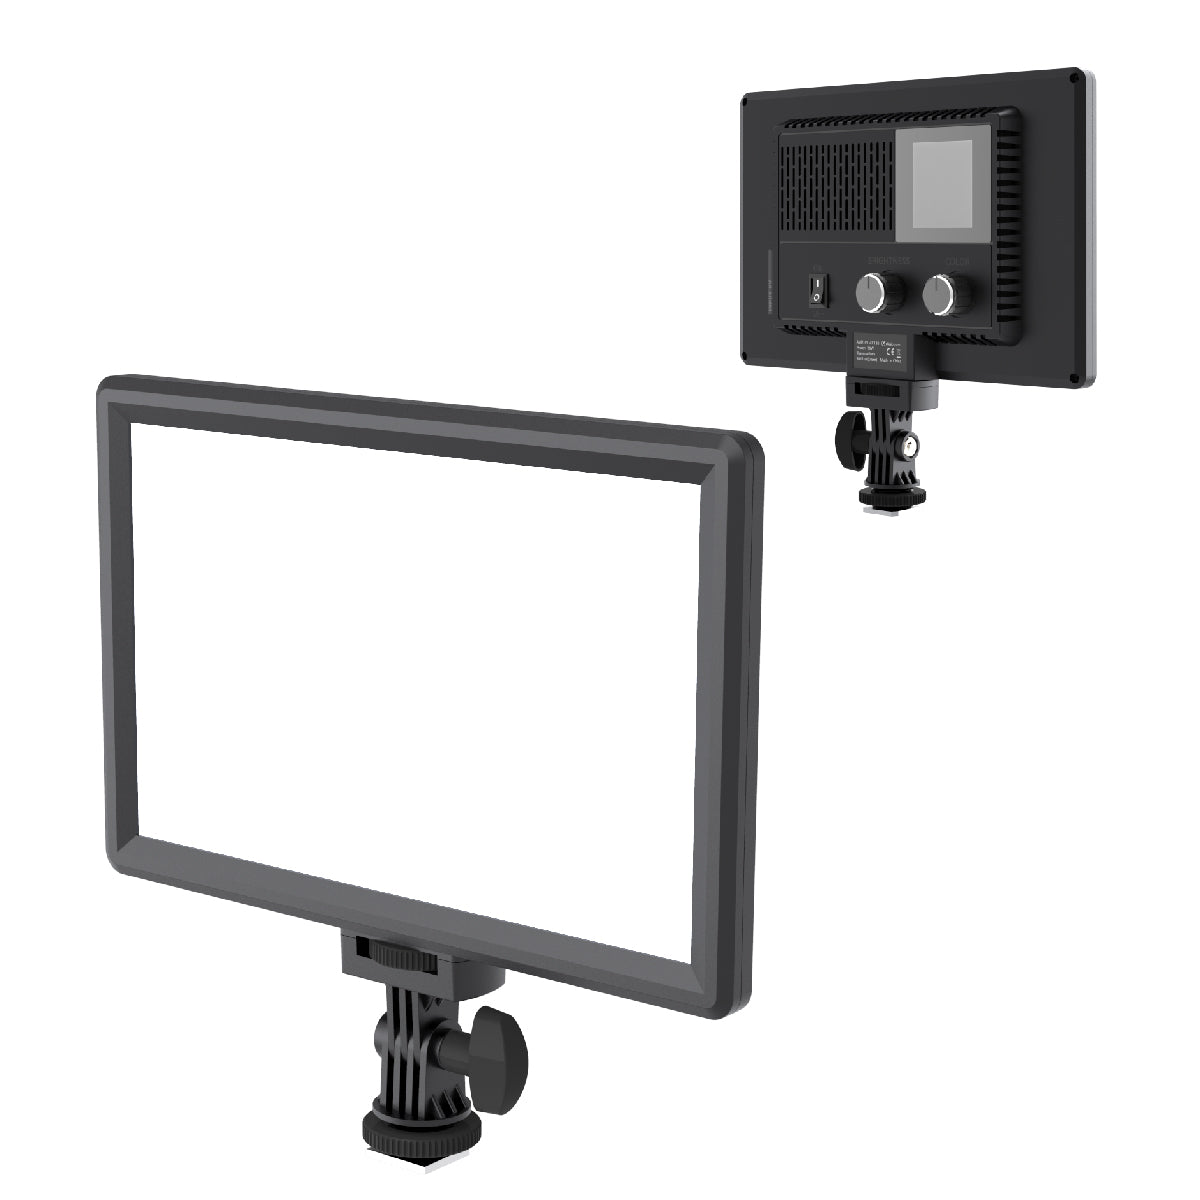 Digipower 120 LED Photo Video Light With Universal Camera Mount